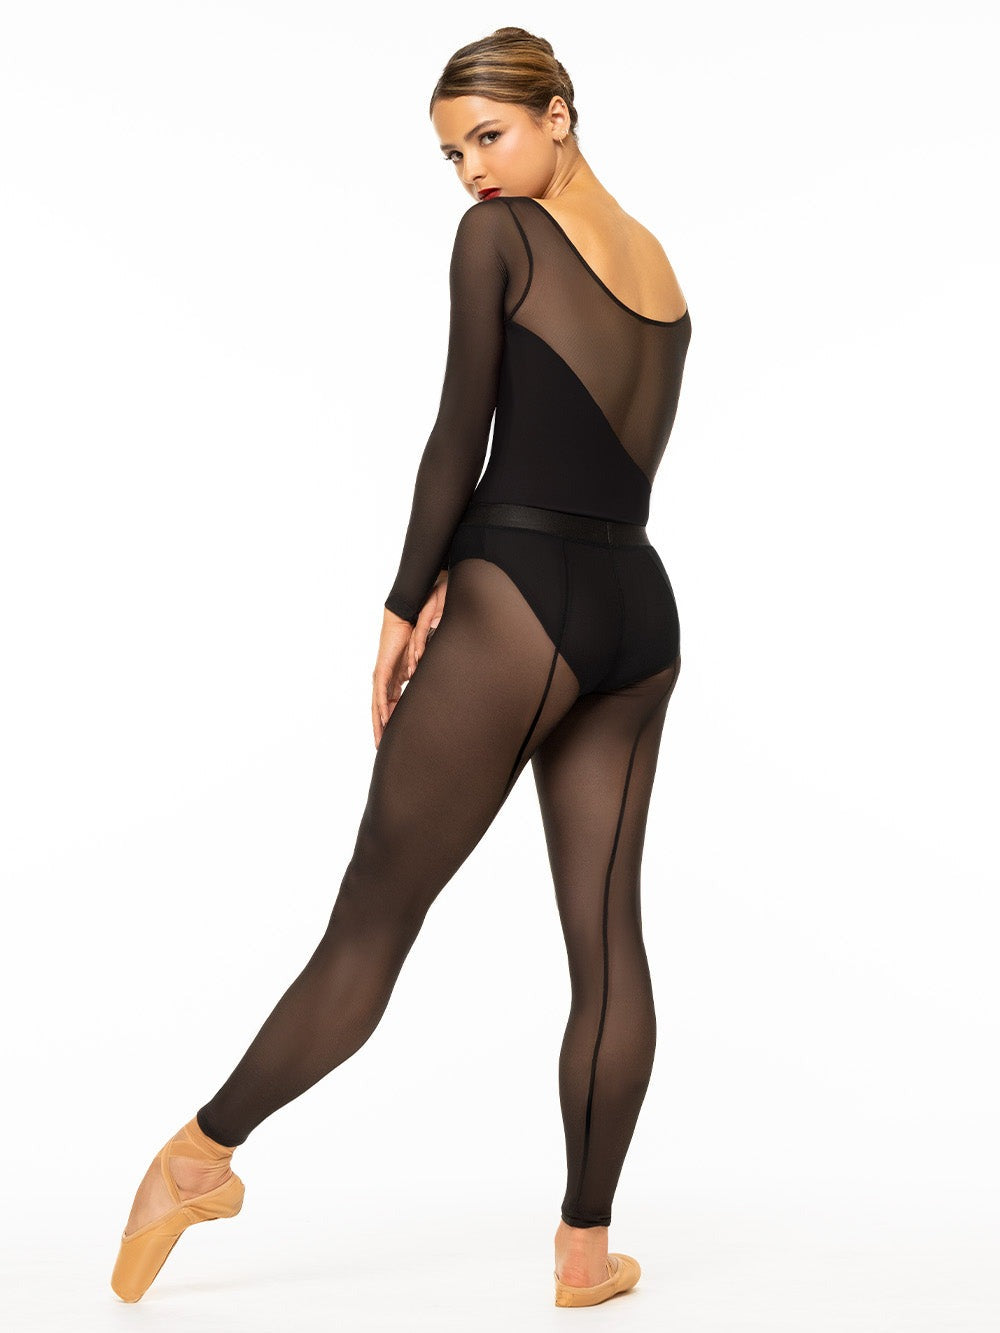 Pin by Tights Tights Tights on Tights Sheer  Womens leotards, Fashion  tights, Legs outfit